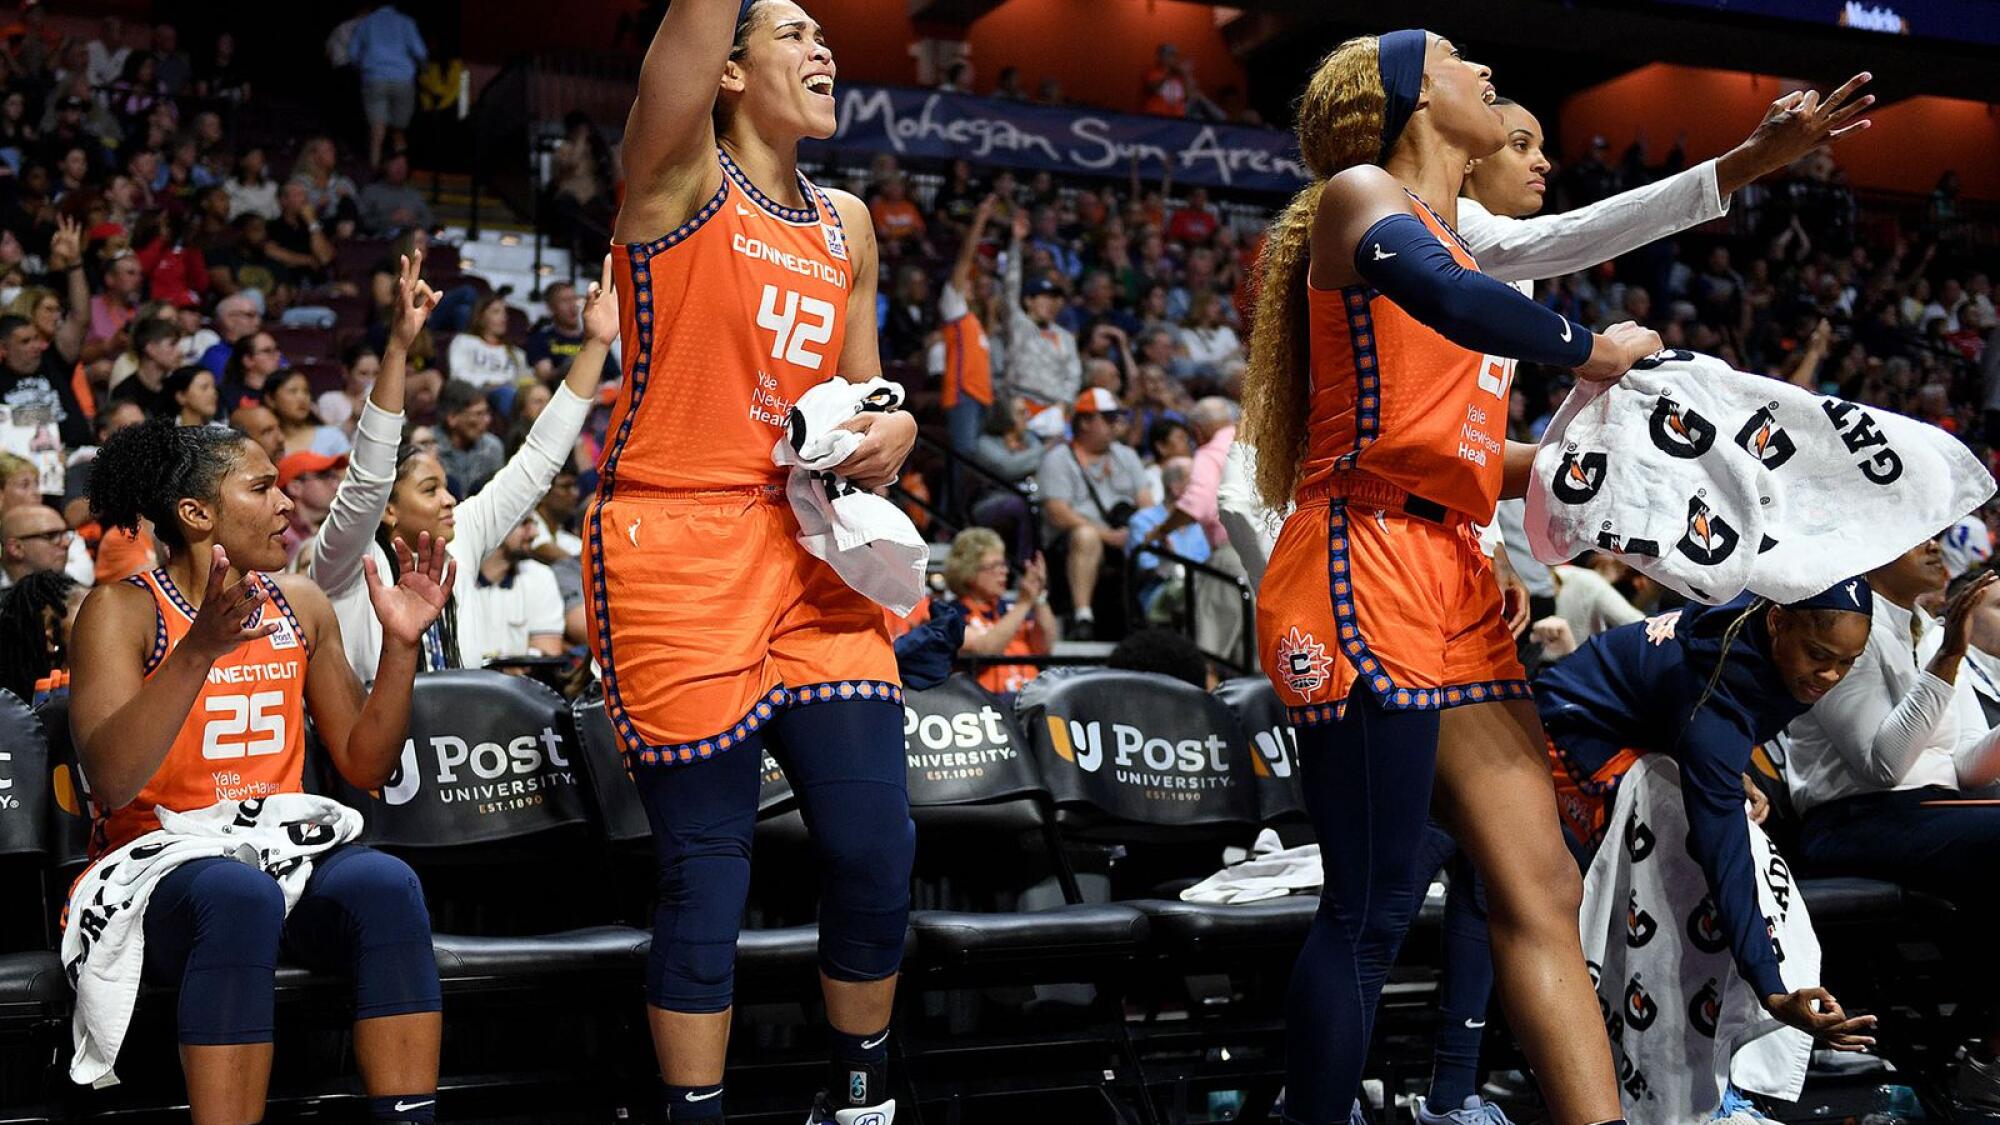 Connecticut Sun runs away with win over Indiana Fever